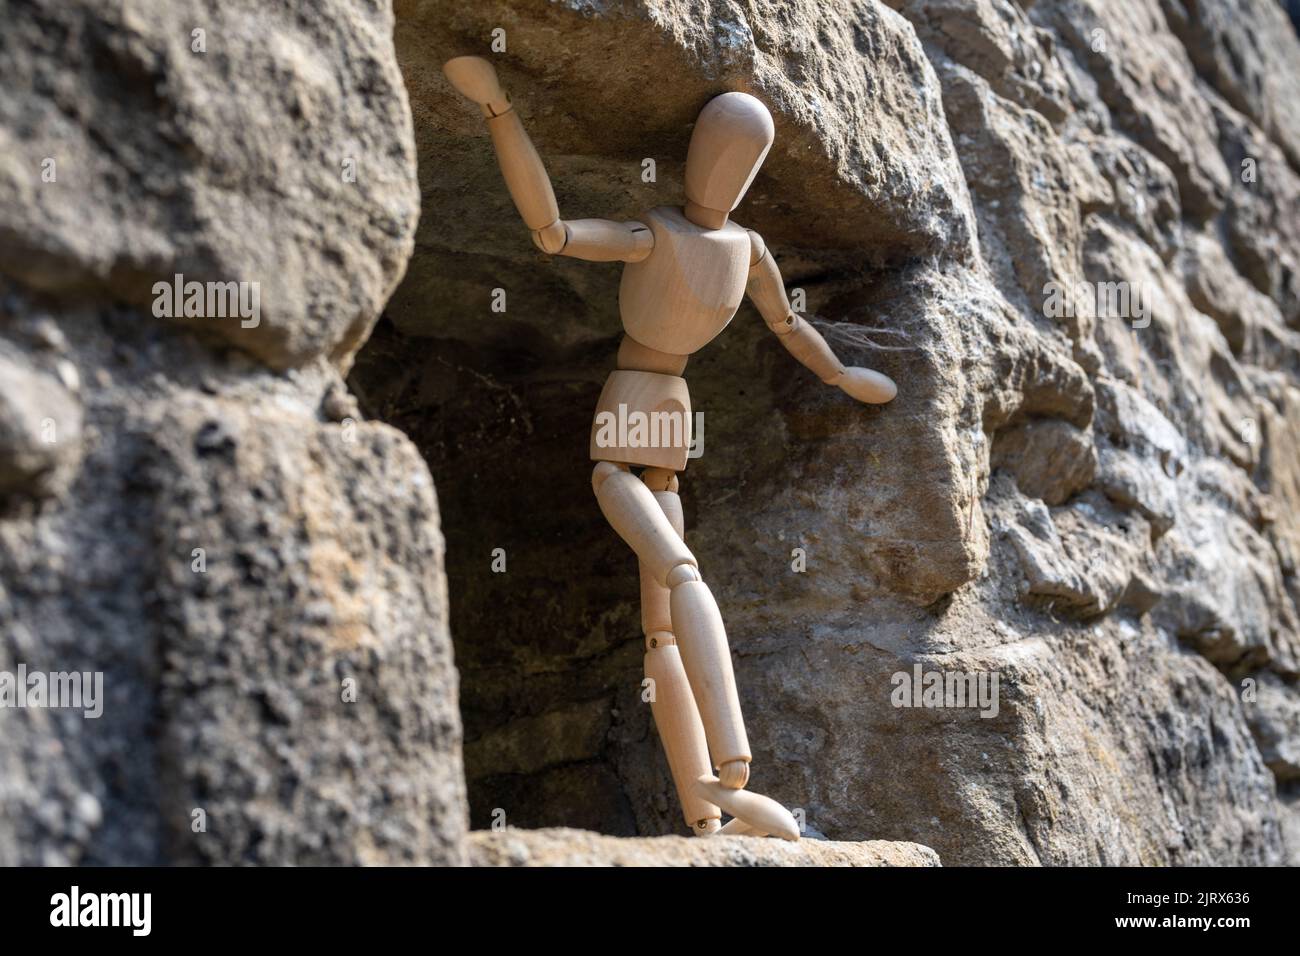 A wooden artist's figure standing, looking out of a stone building. Concept of an uncertain future, worry and concern. Stock Photo